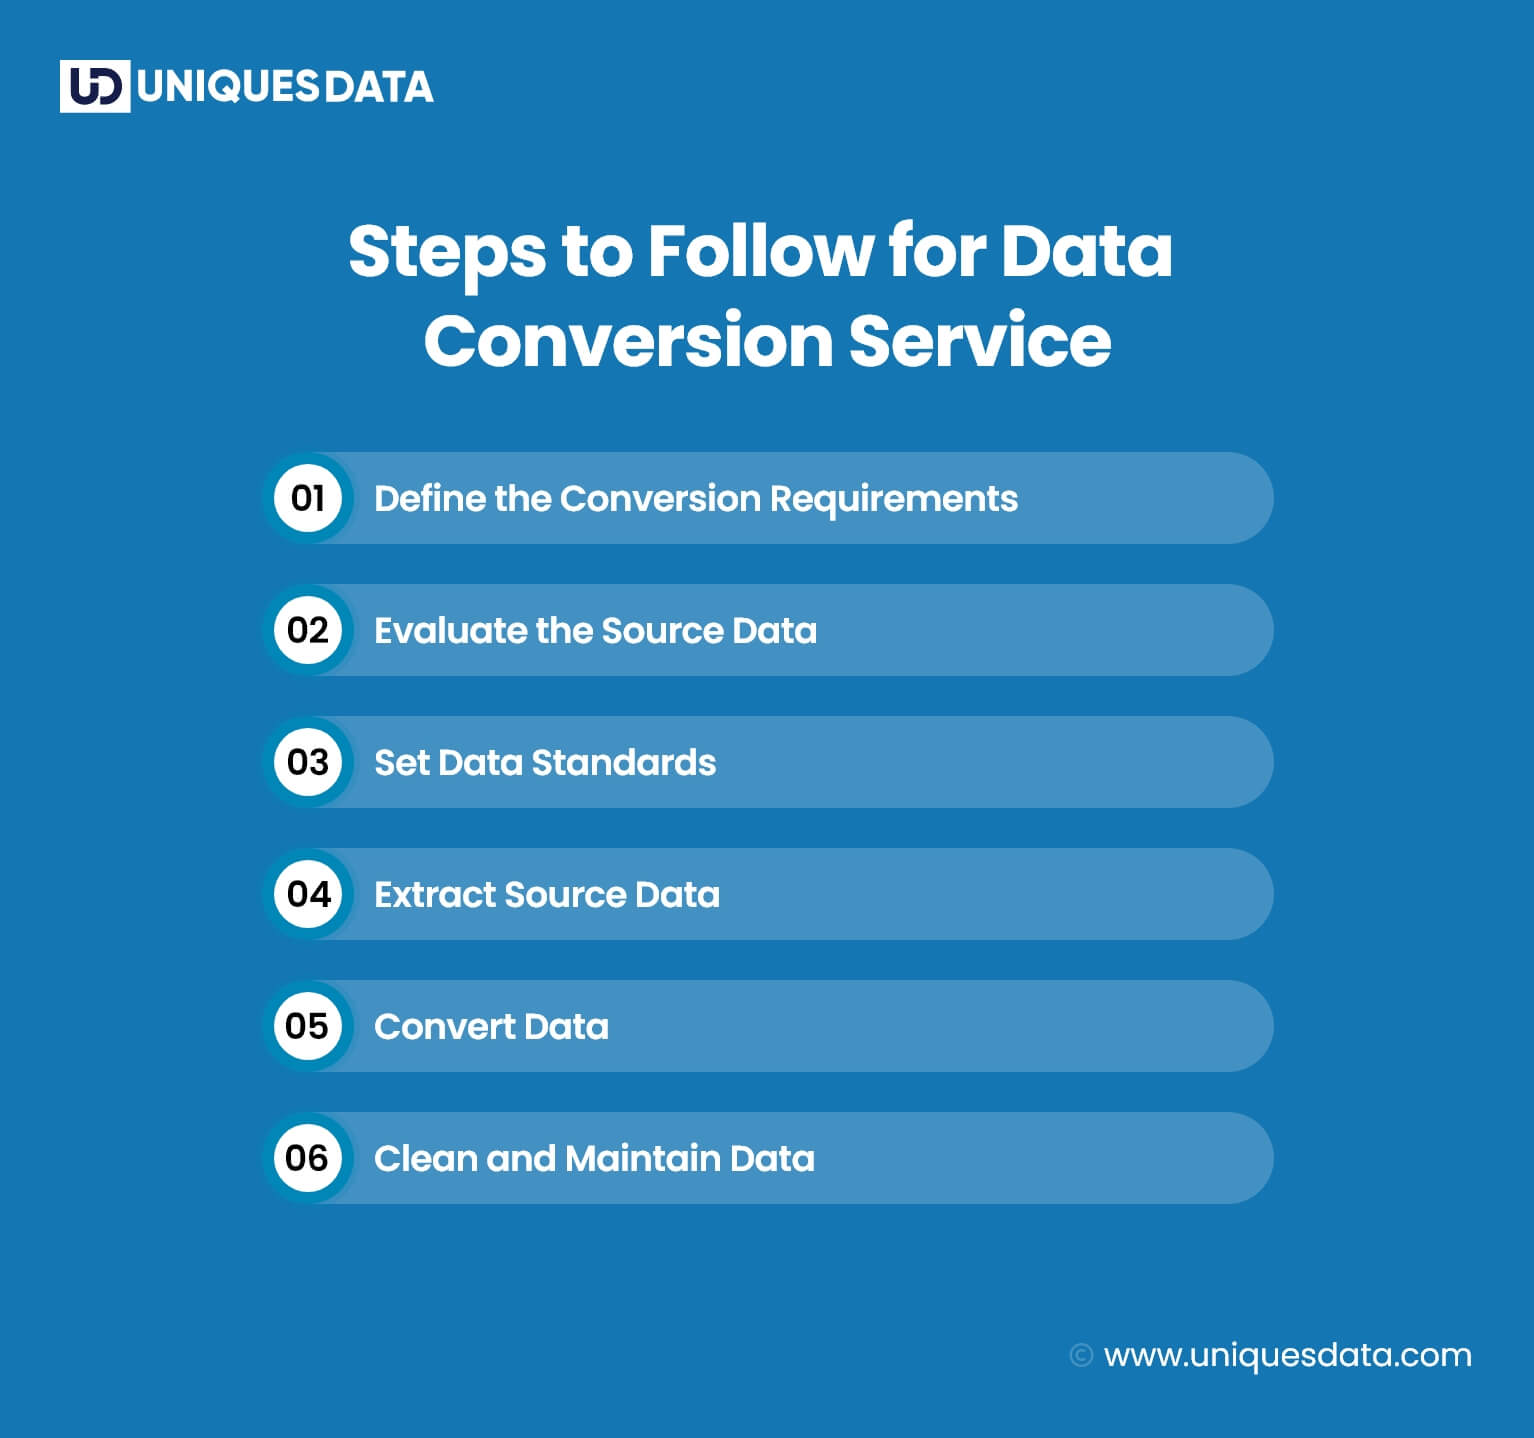 Steps to Follow for Data Conversion Service